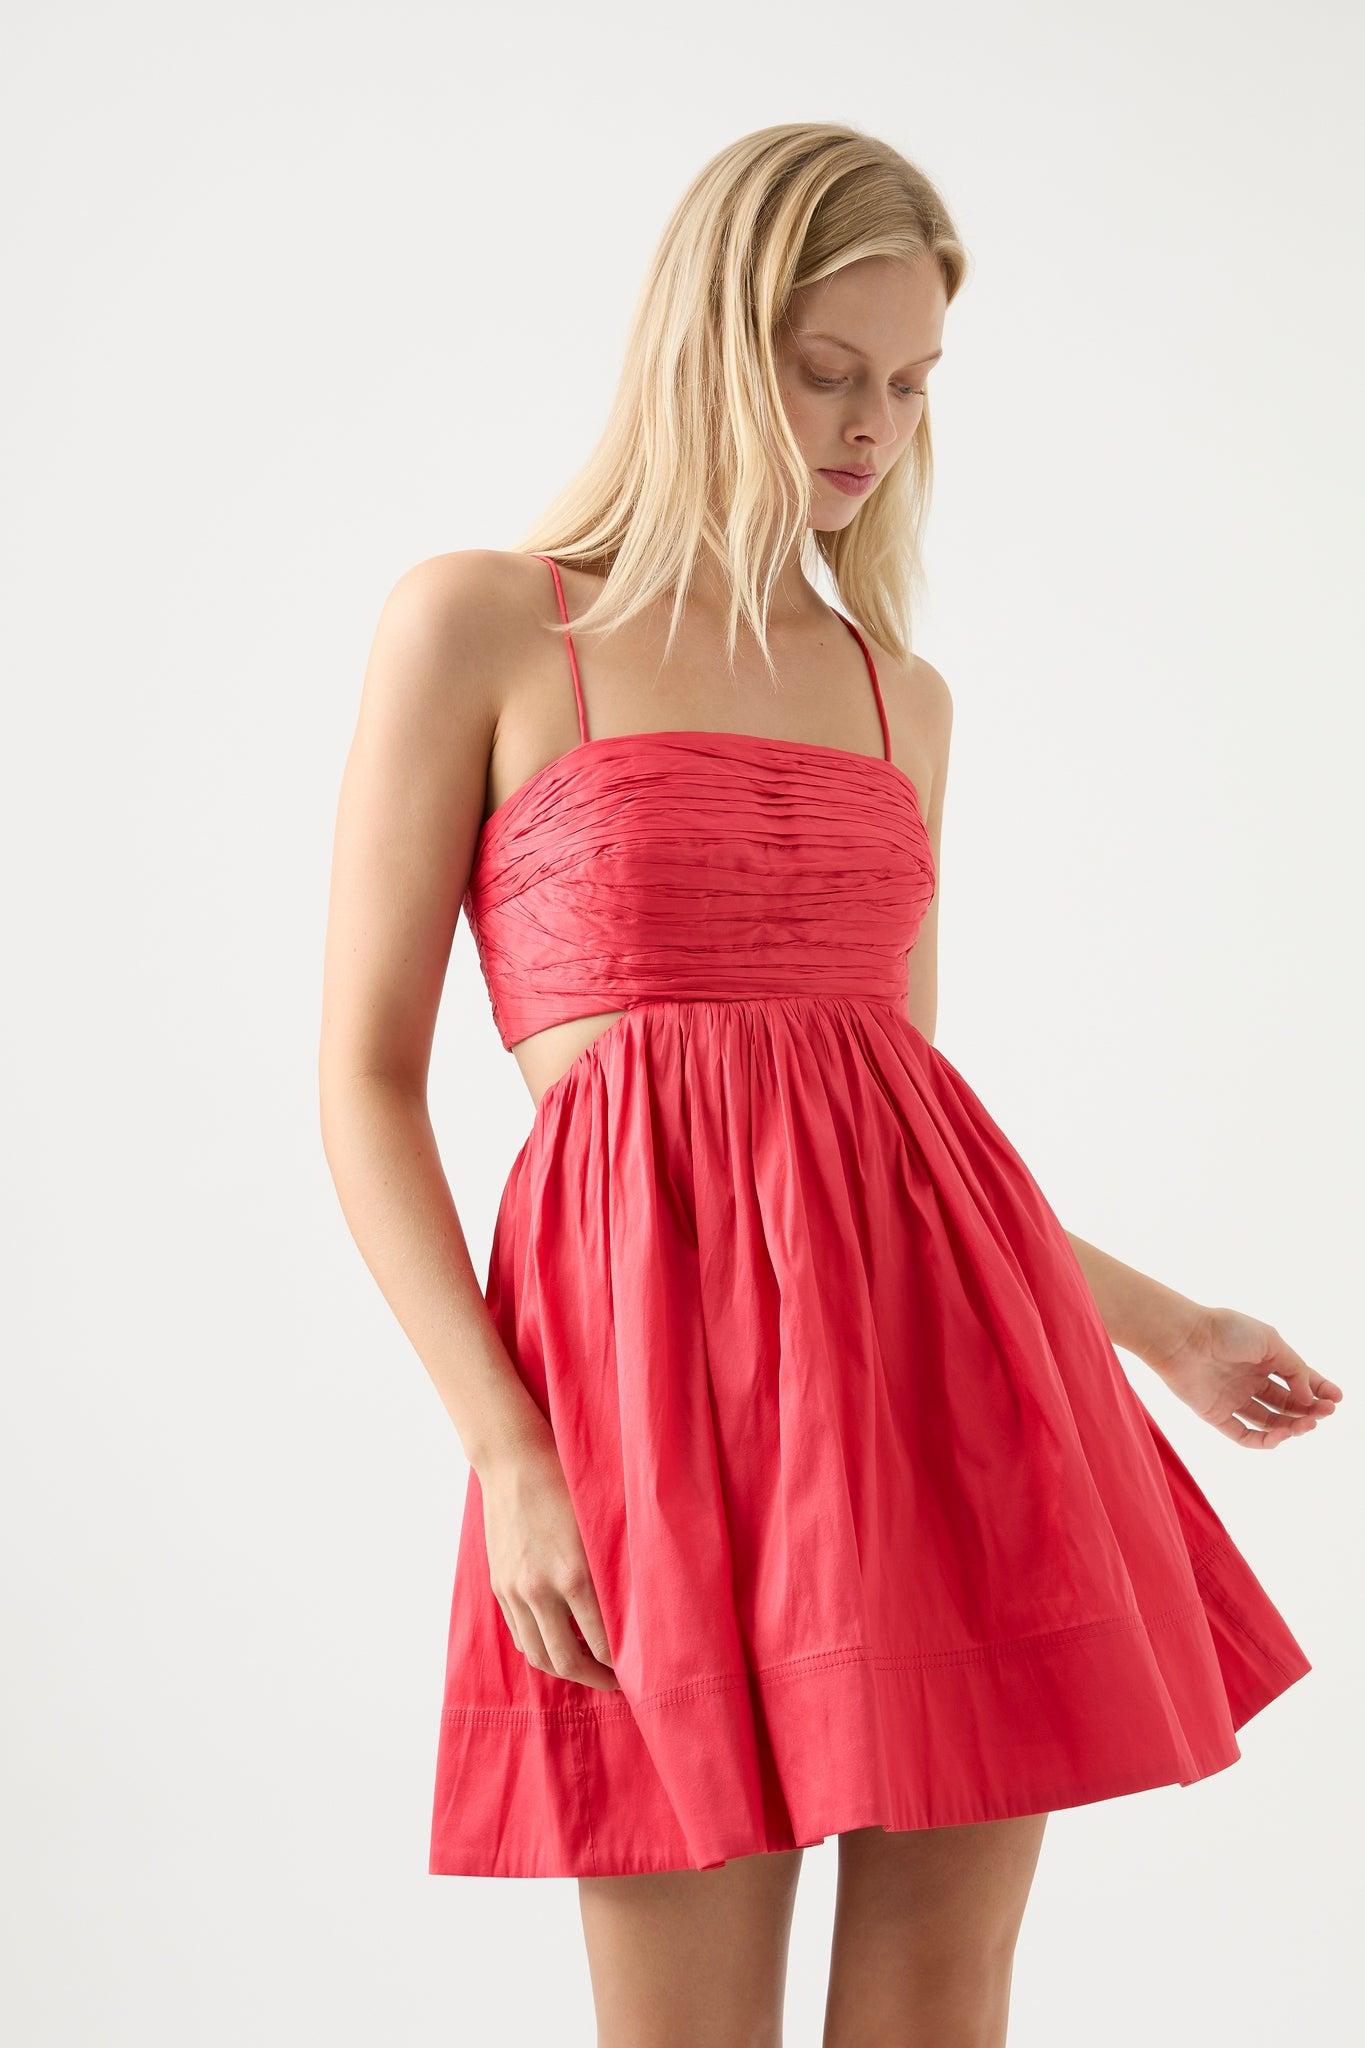 Aje. Liza Ruched Baby Doll Dress in Red | Lyst